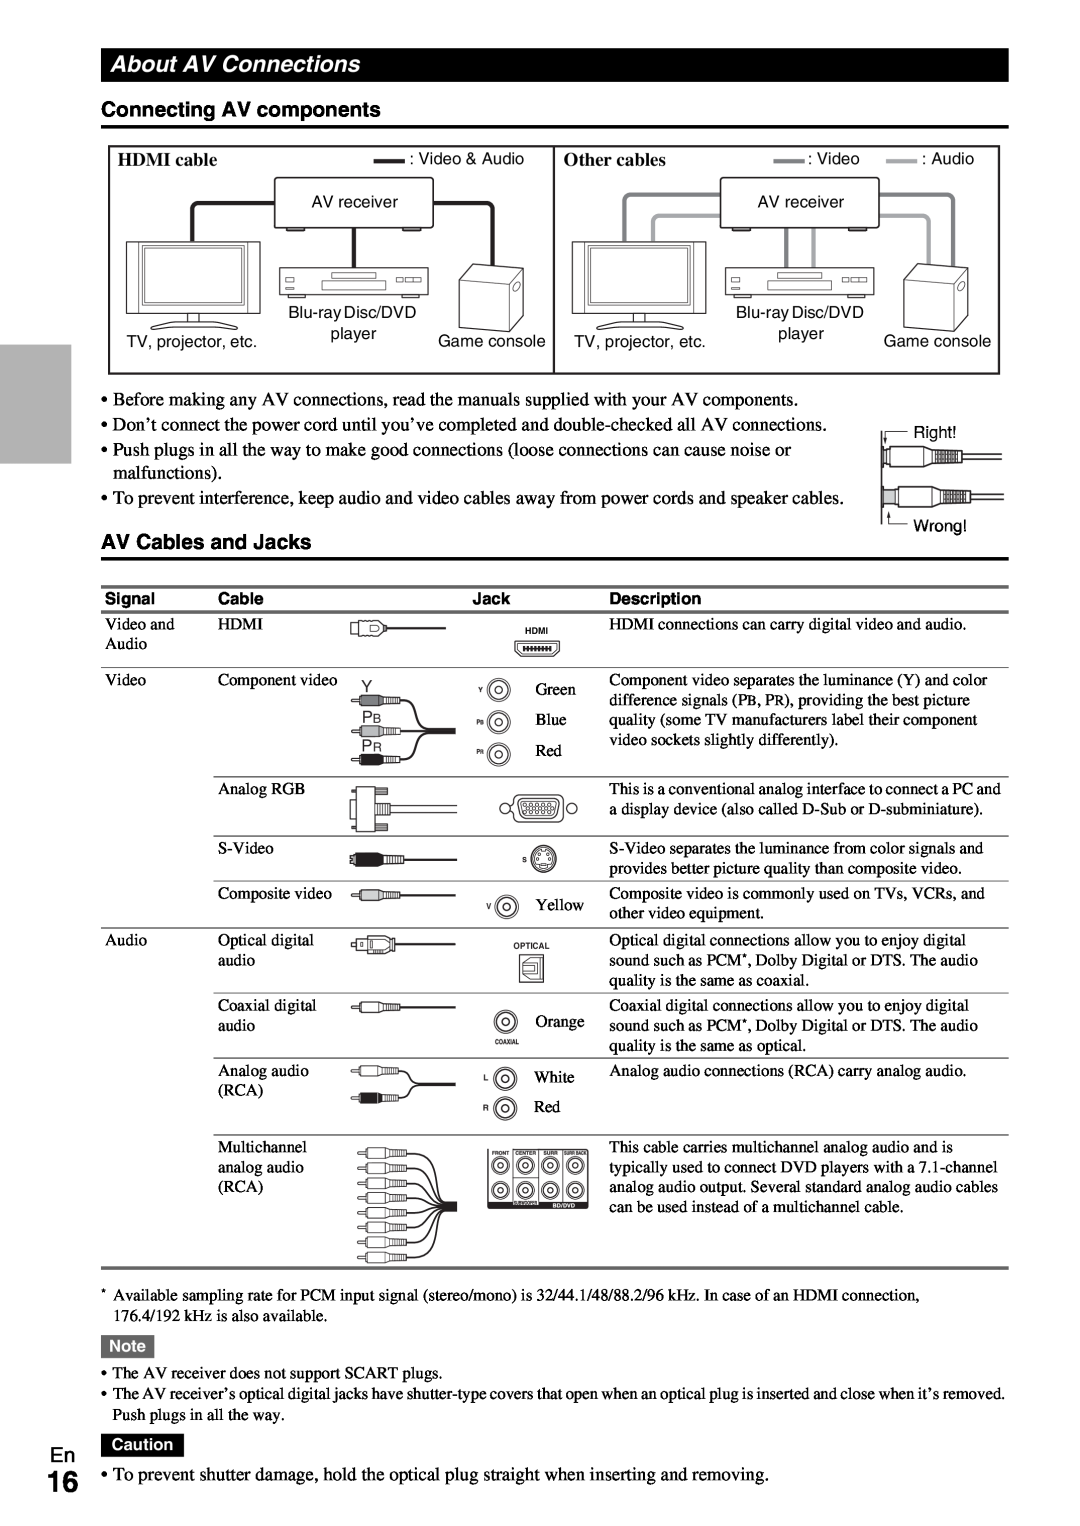 Onkyo TX-NR1009 instruction manual About AV Connections, Connecting AV components, AV Cables and Jacks 